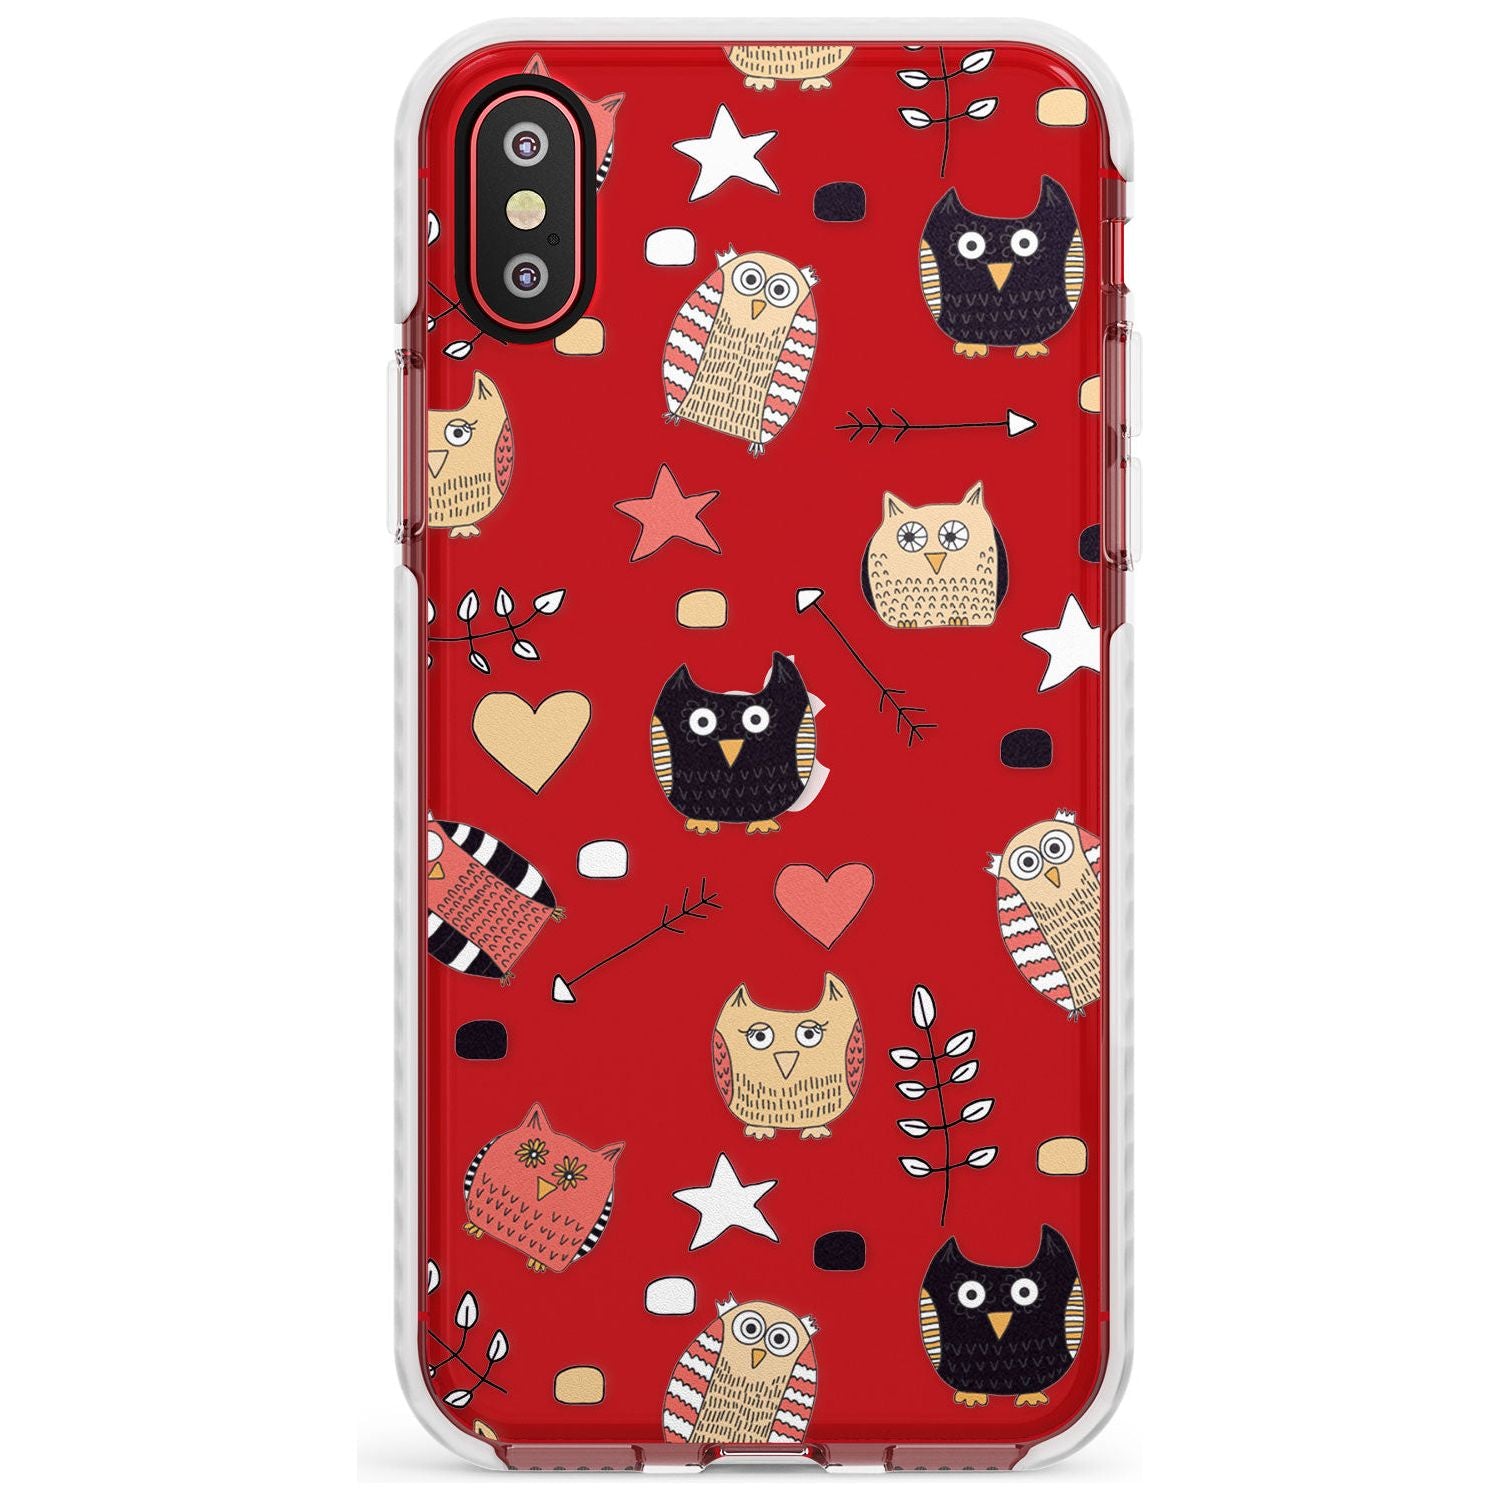 Cute Owl Pattern Impact Phone Case for iPhone X XS Max XR